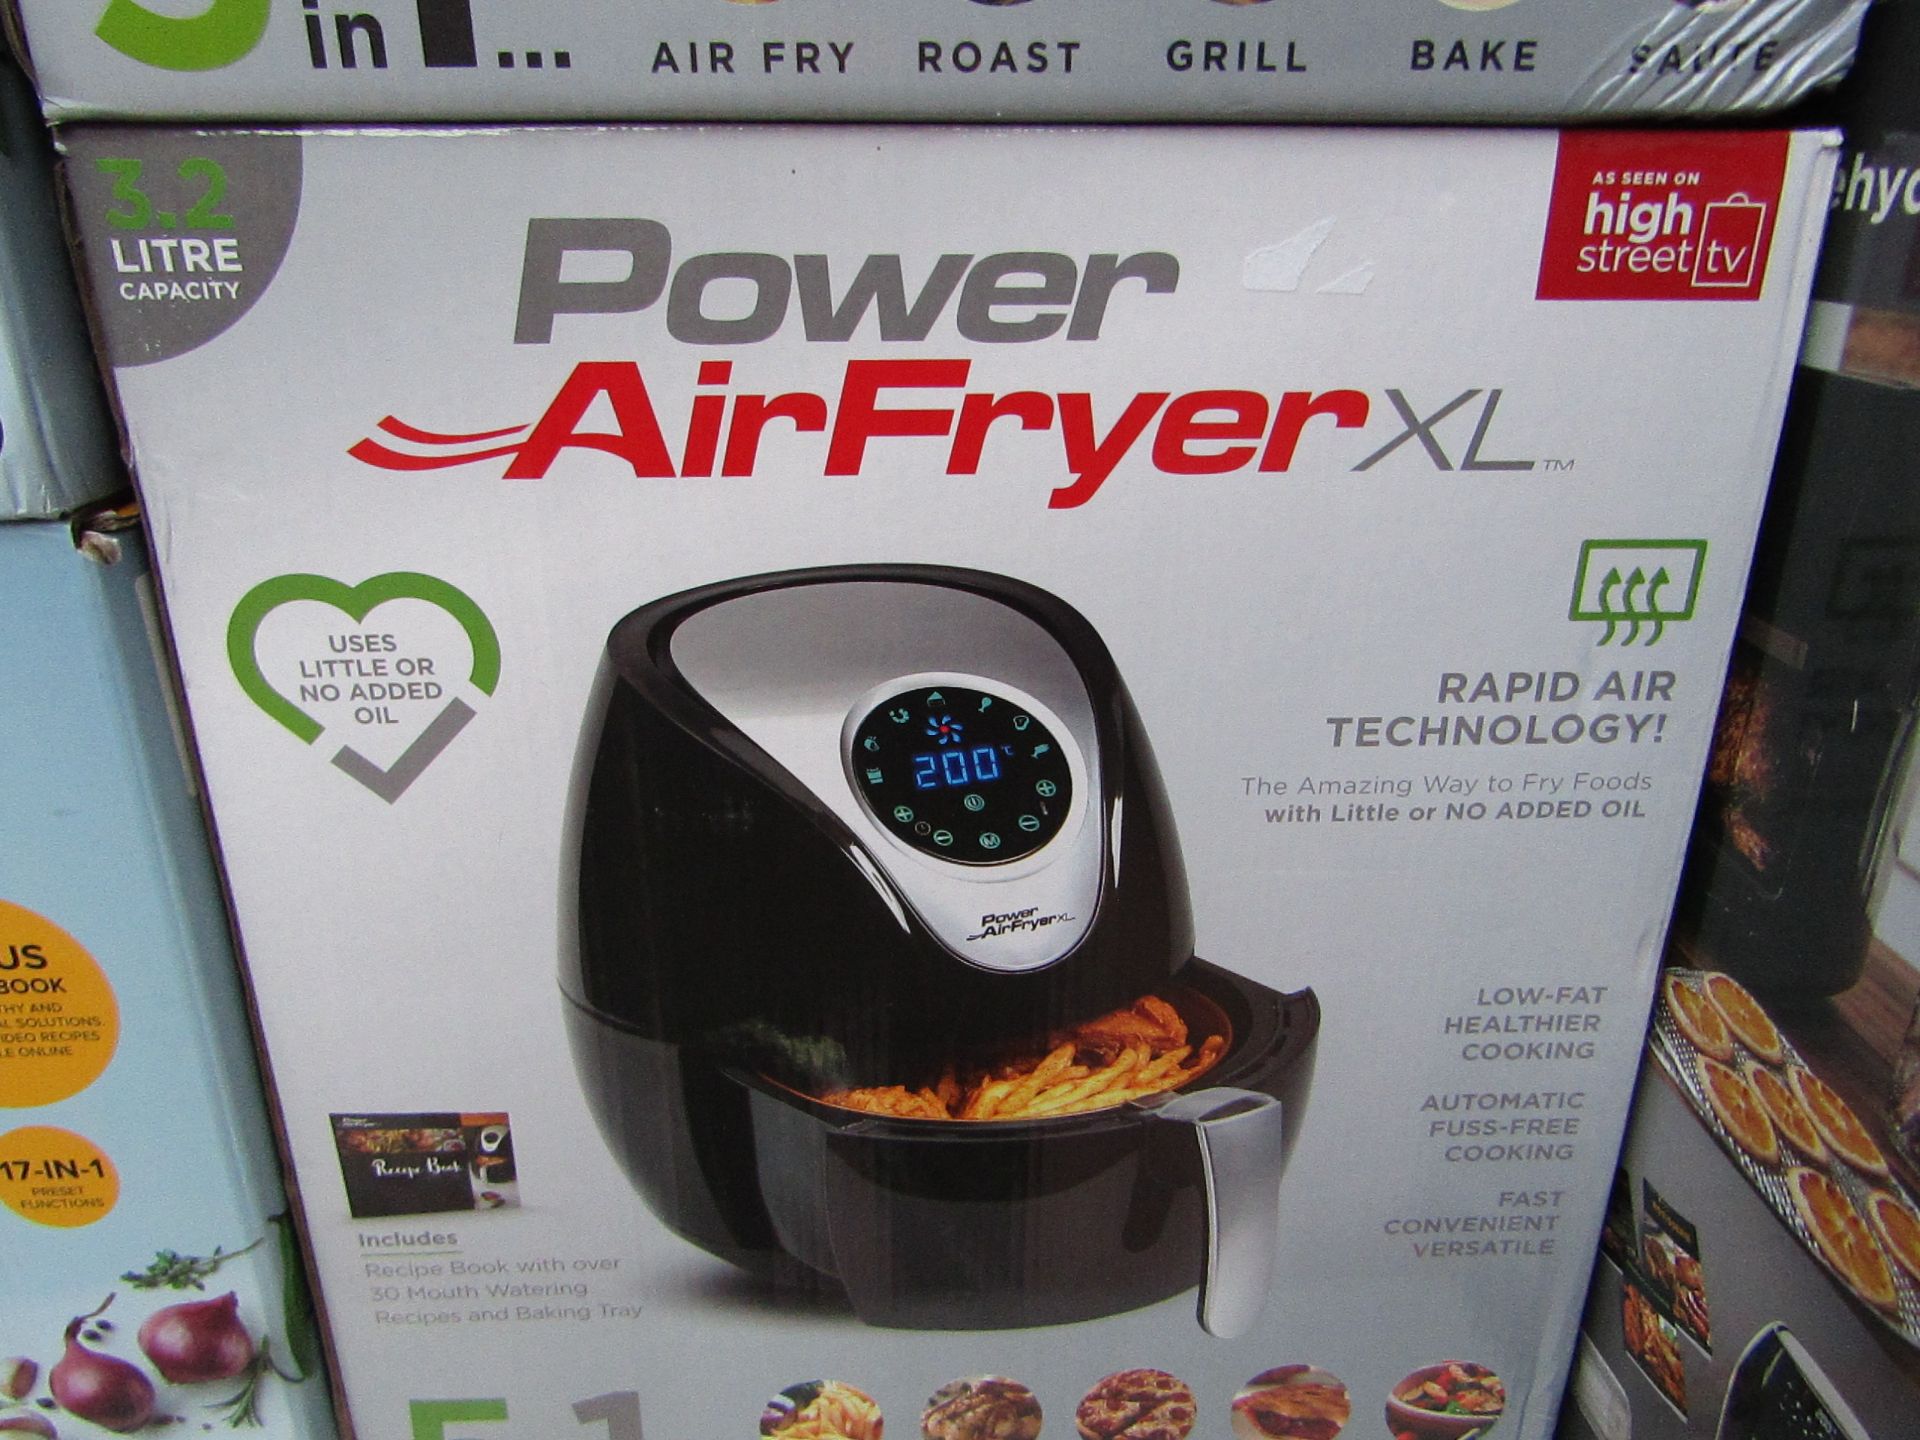 | 1x | POWER AIR FRYER XL 3.2L | PAT TESTED AND BOXED | NO ONLINE RE-SALE | SKU C5060191465366 | RRP